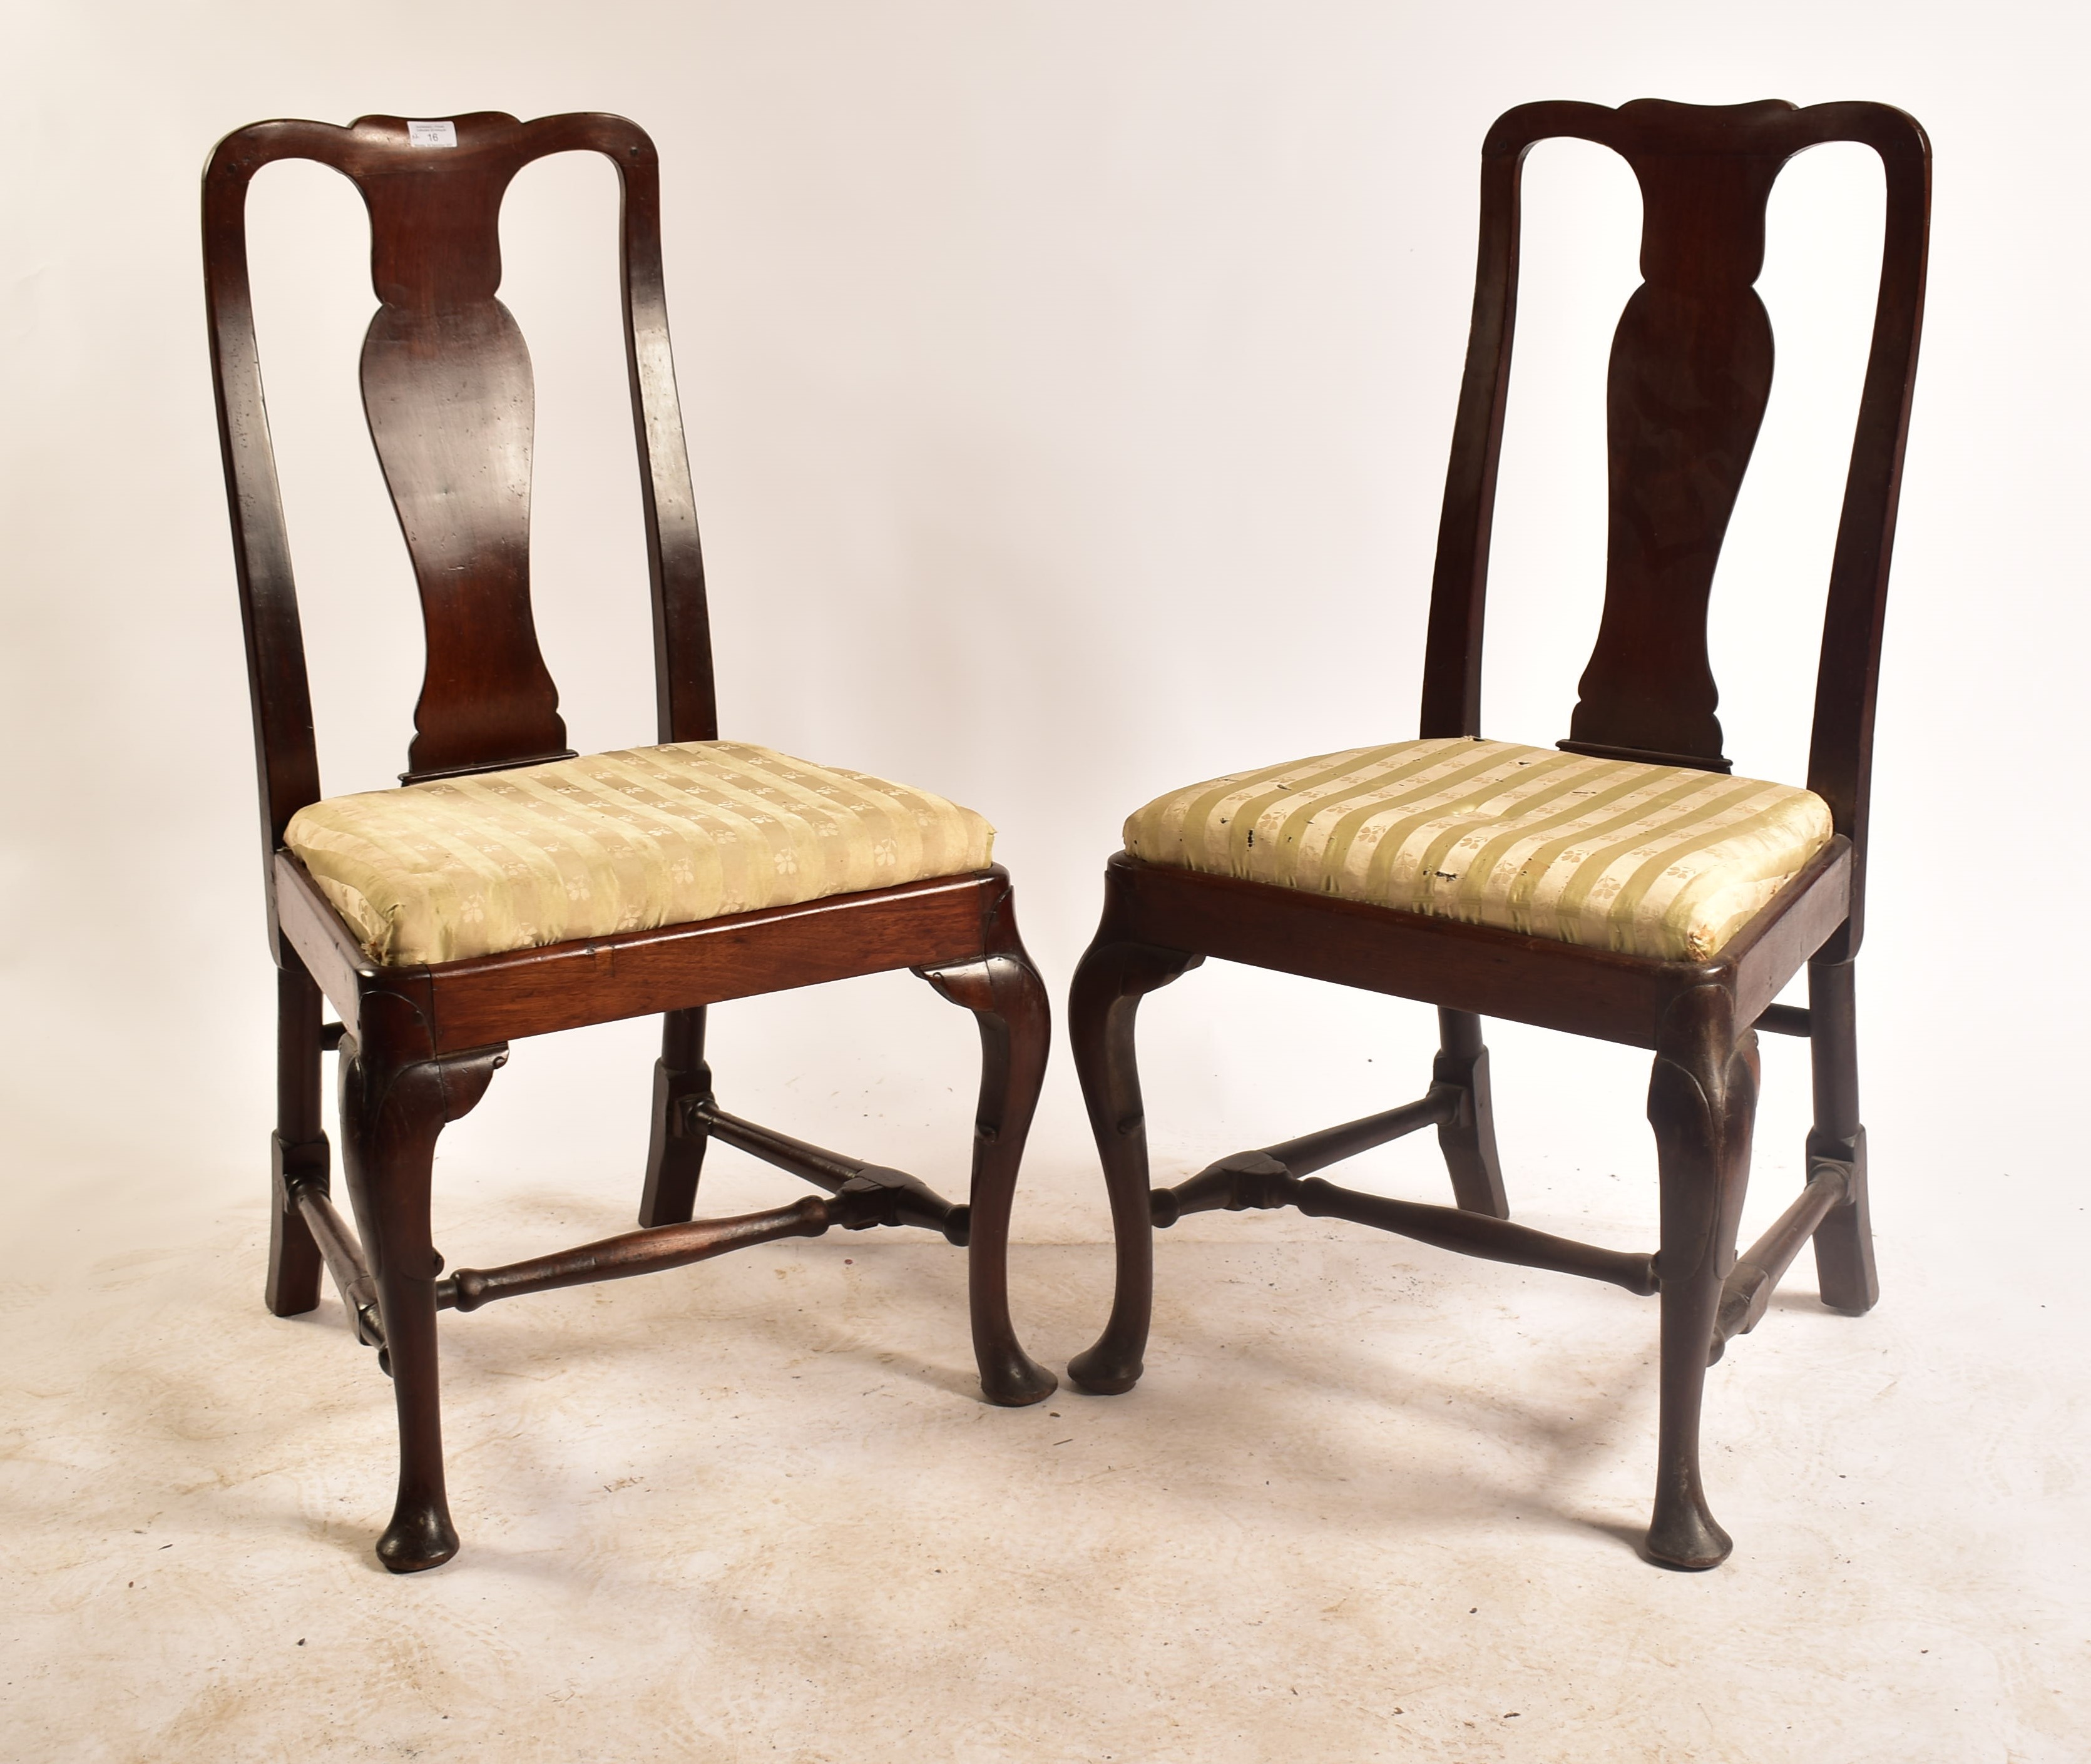 PAIR OF 19TH CENTURY VICTORIAN MAHOGANY DINING CHAIRS - Image 4 of 9